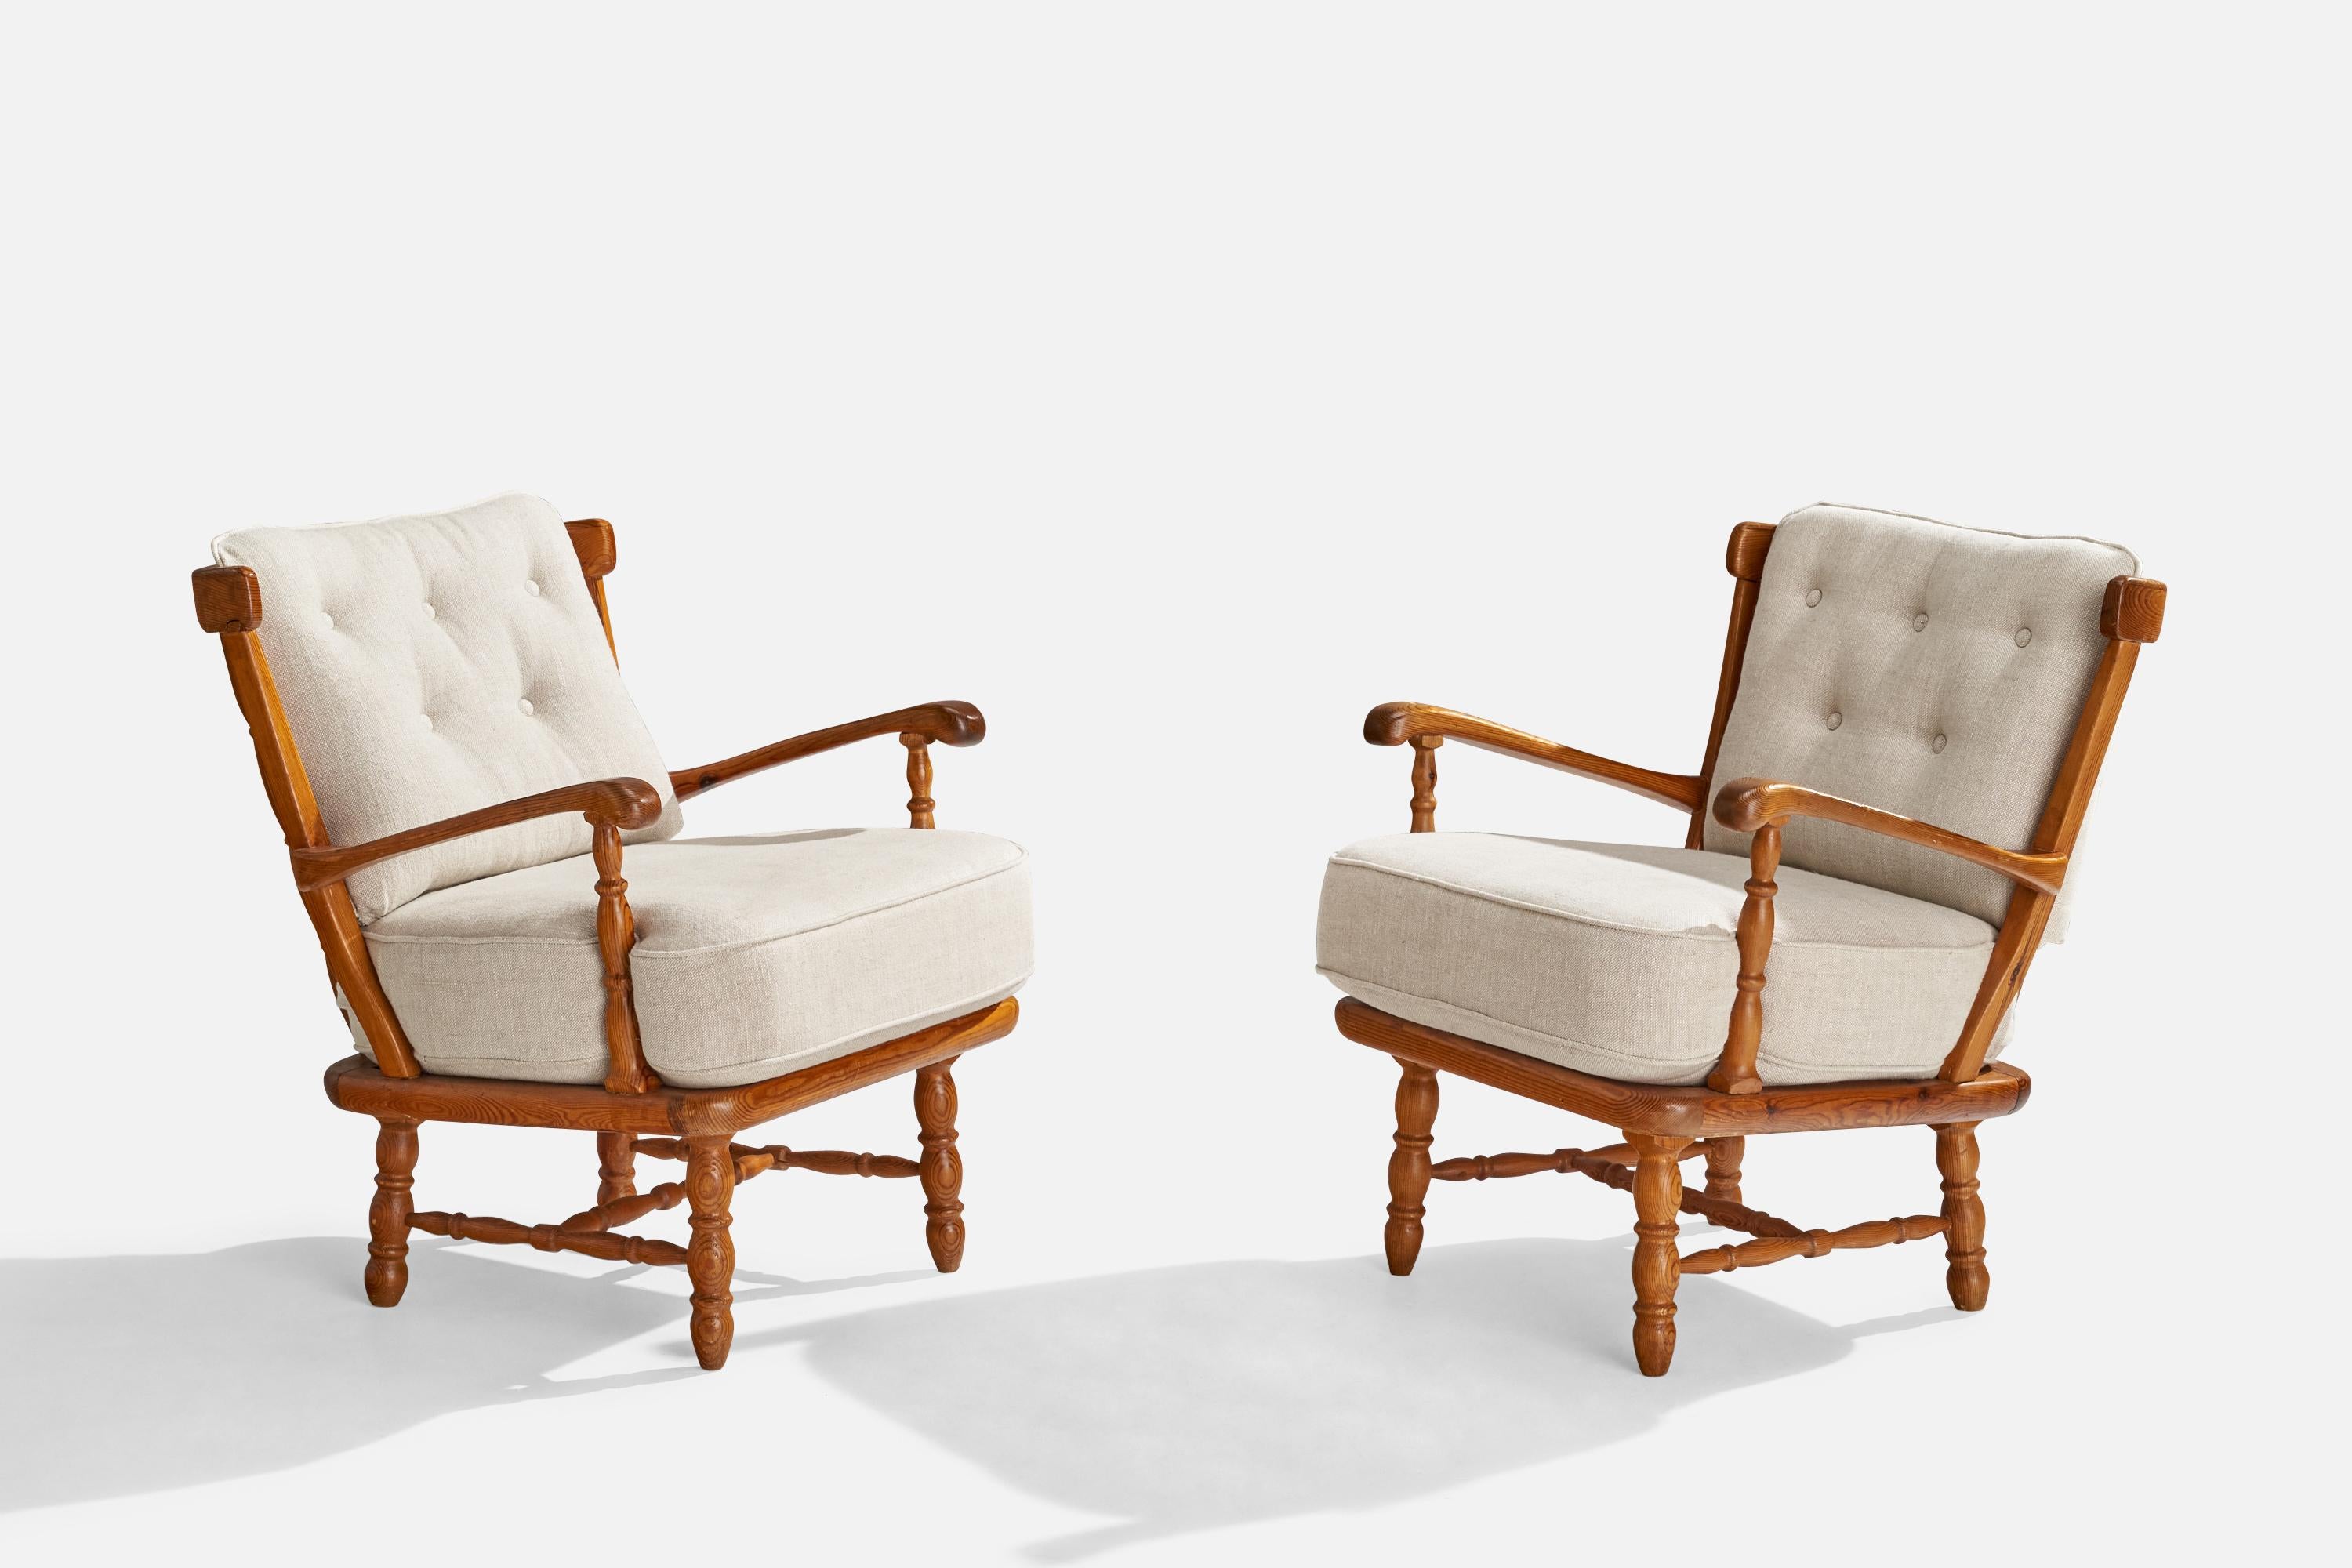 A pair of pine and white fabric lounge chairs produced by Göperts, Sweden, c. 1950s.

Seat height: 19”